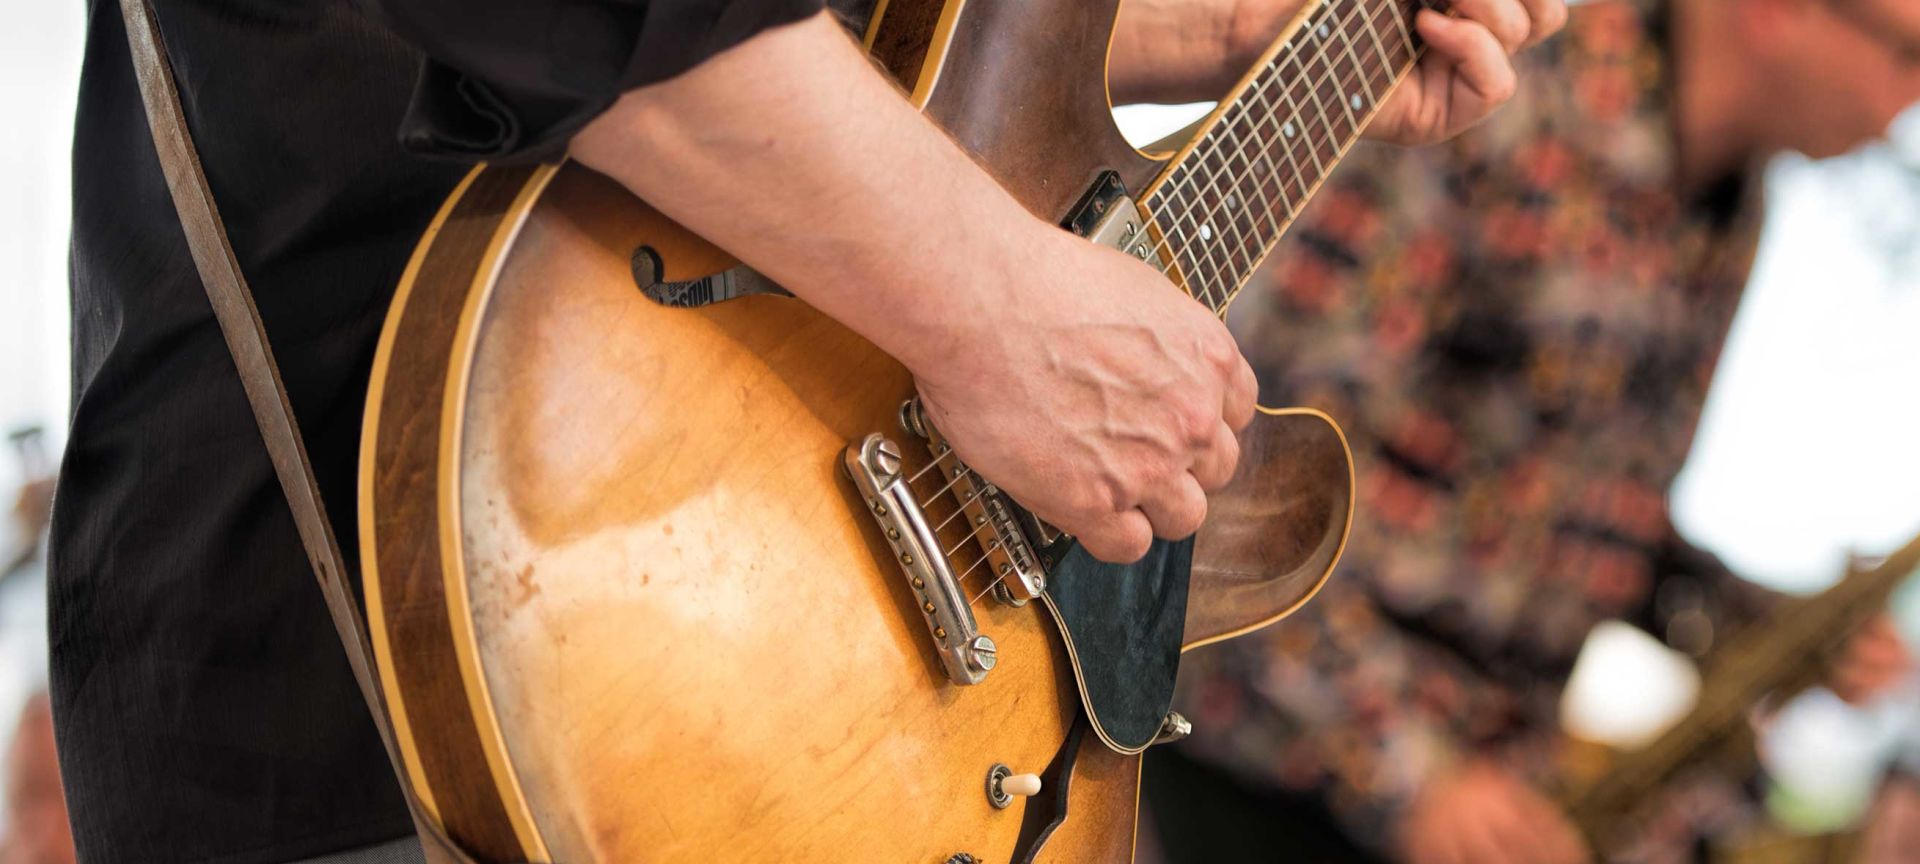 A Close Up Of A Person Holding A Guitar